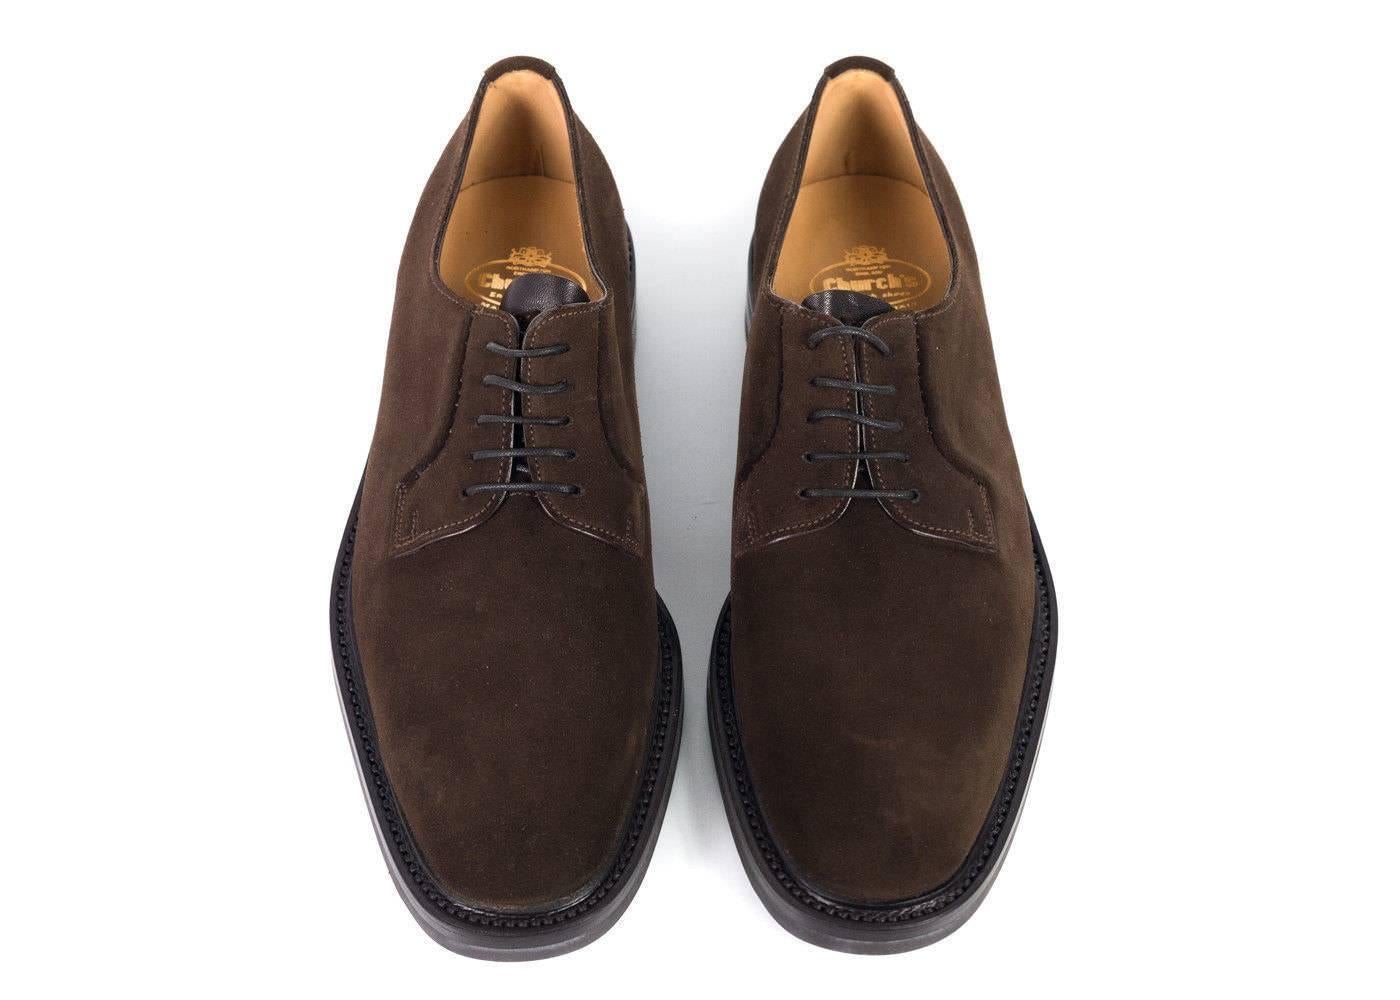 Men's Church's Women's Dark Brown Suede Lace Up Shoes For Sale